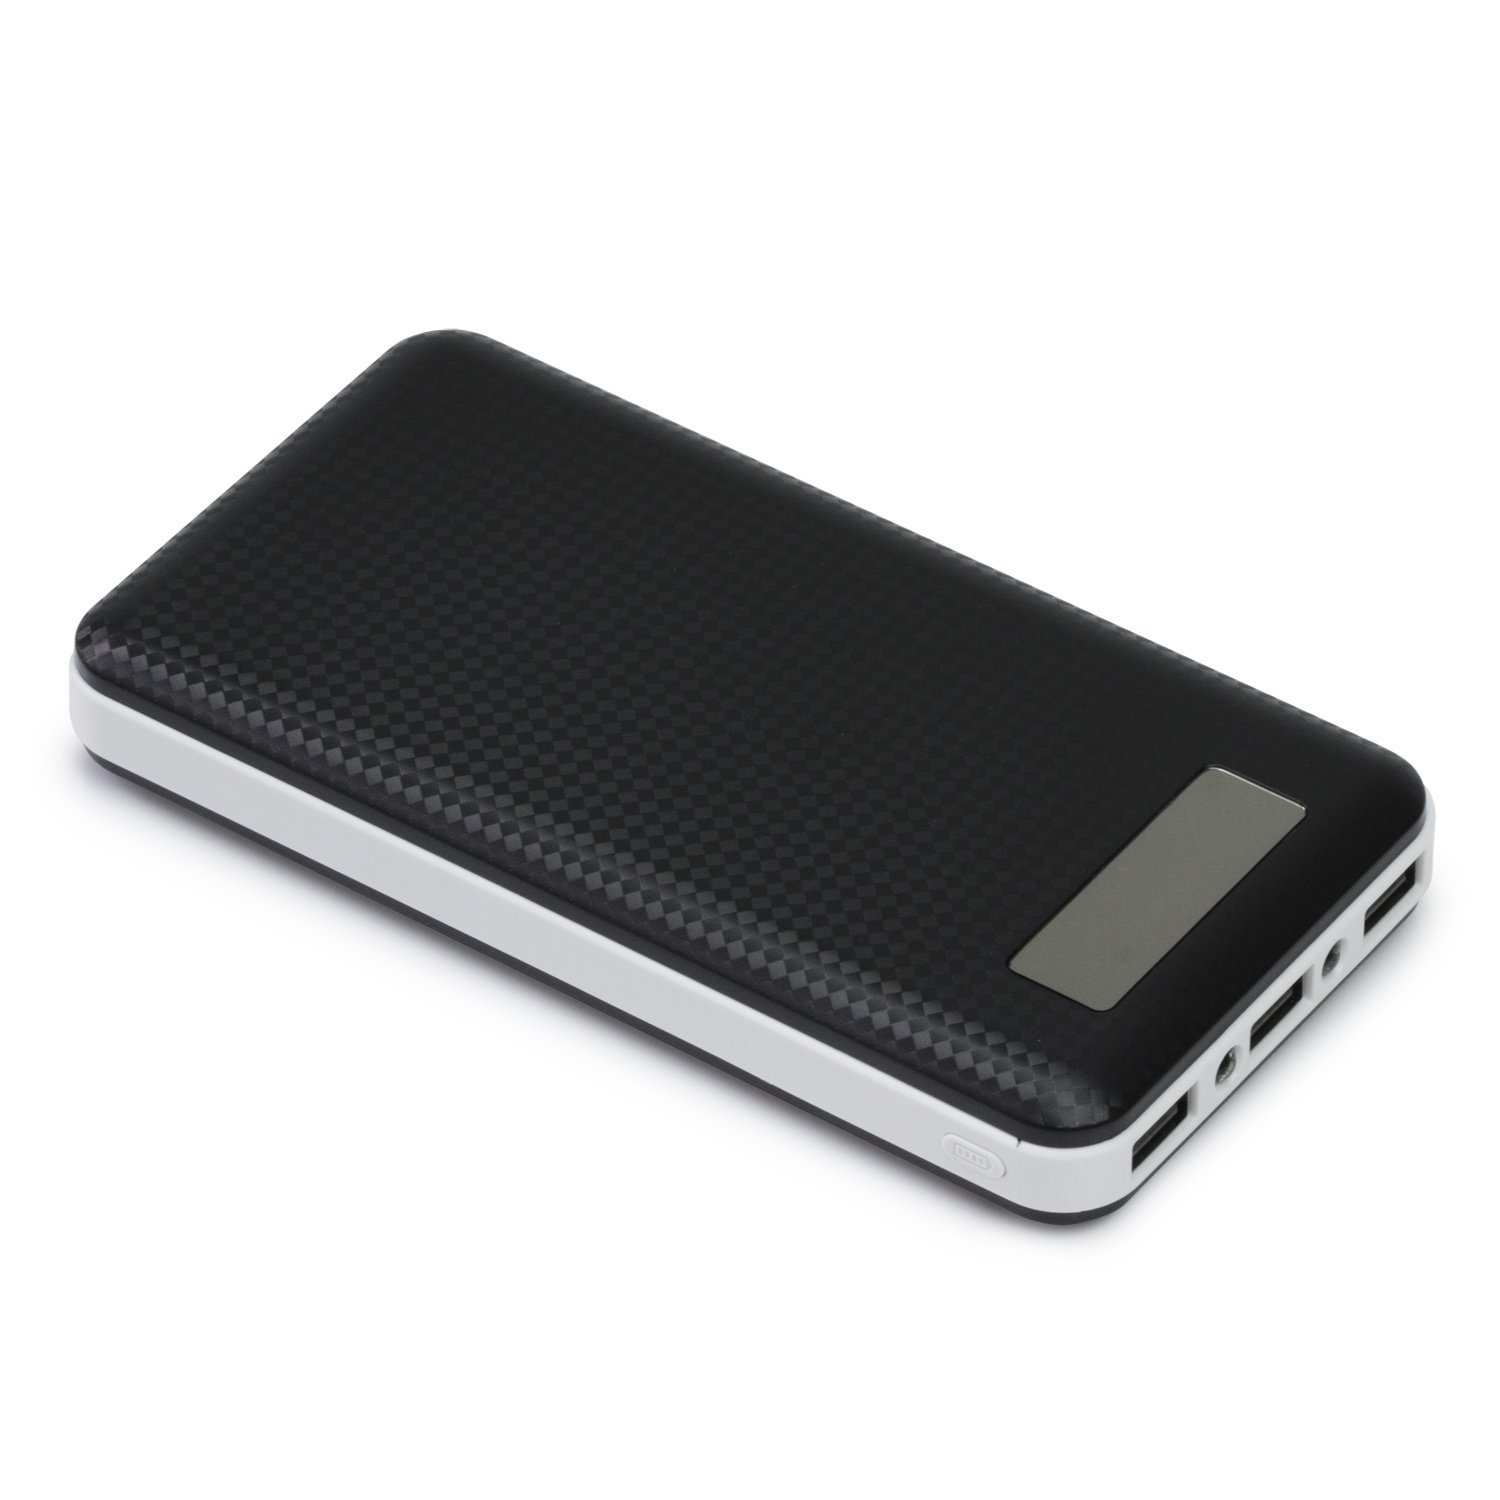 Portable charger external battery